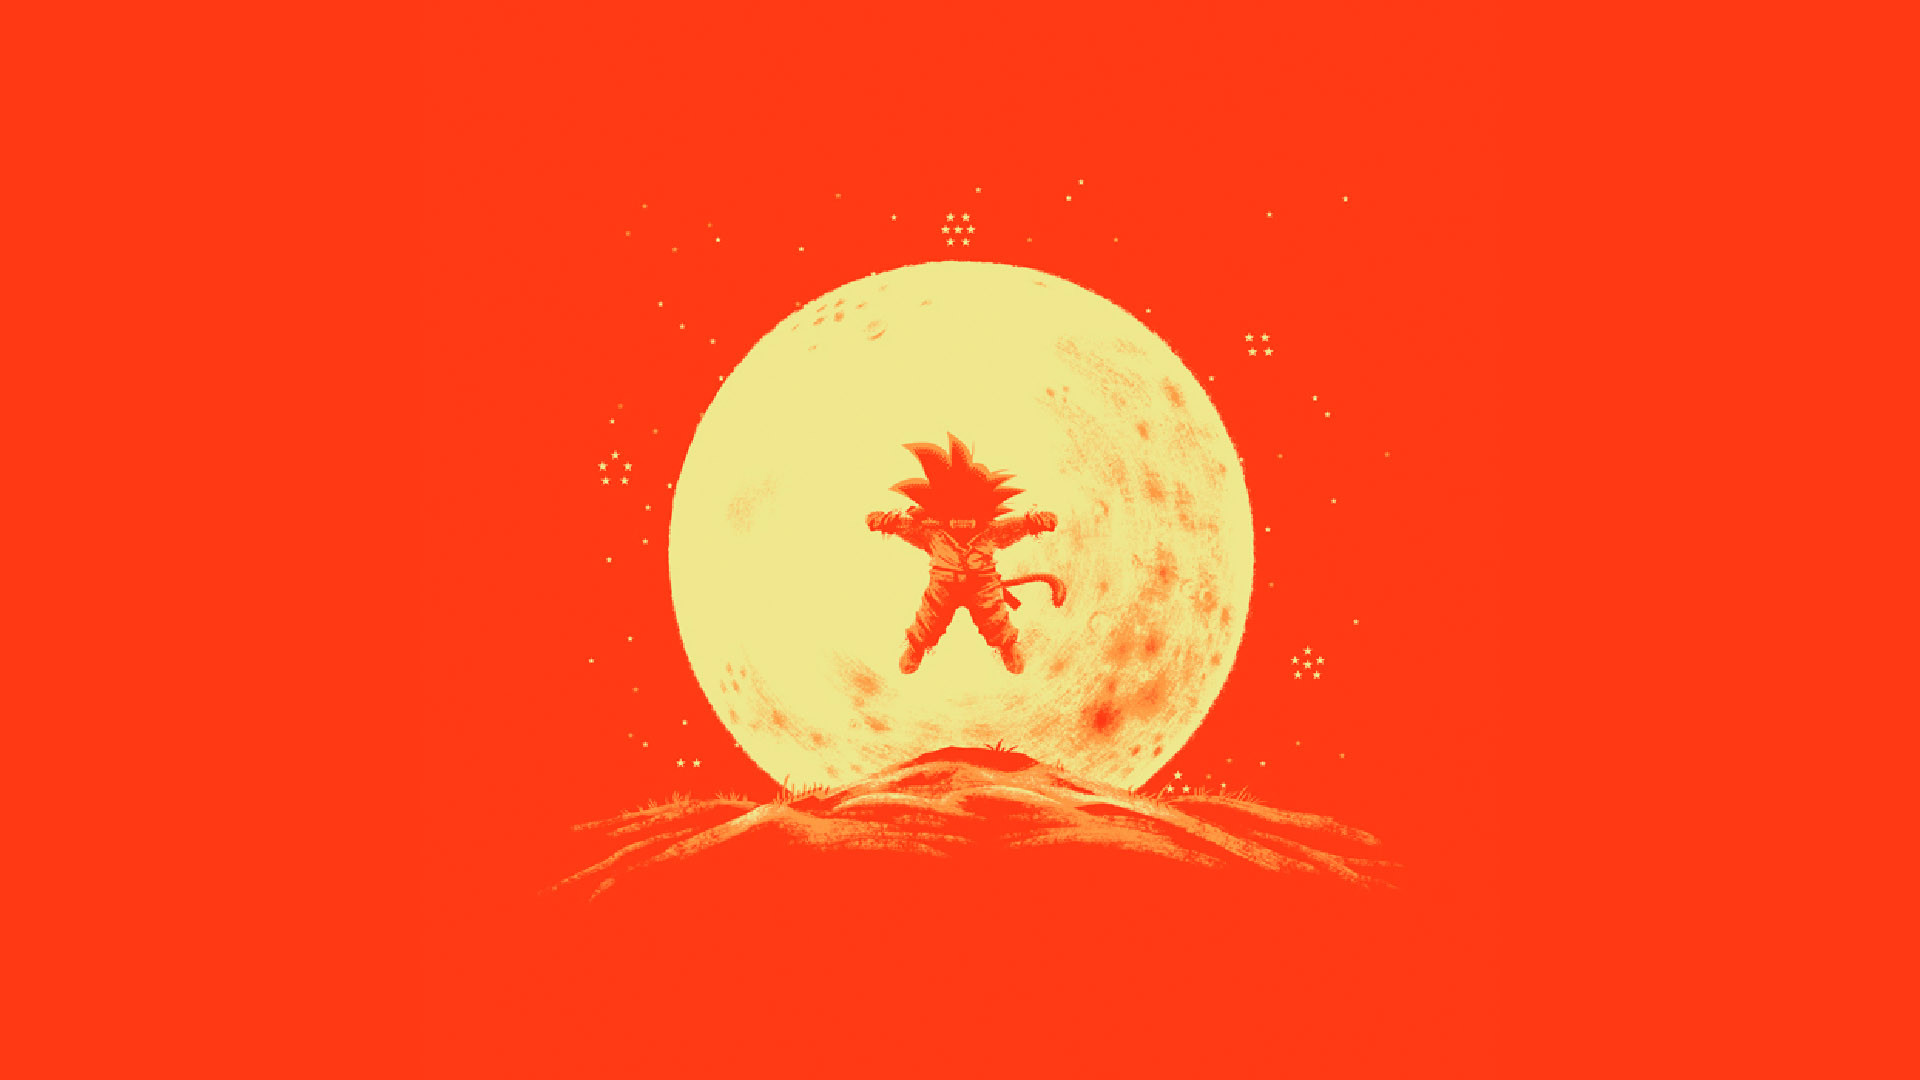 1920x1080 Goku wallpaper that was on frontpage earlier () - Imgur